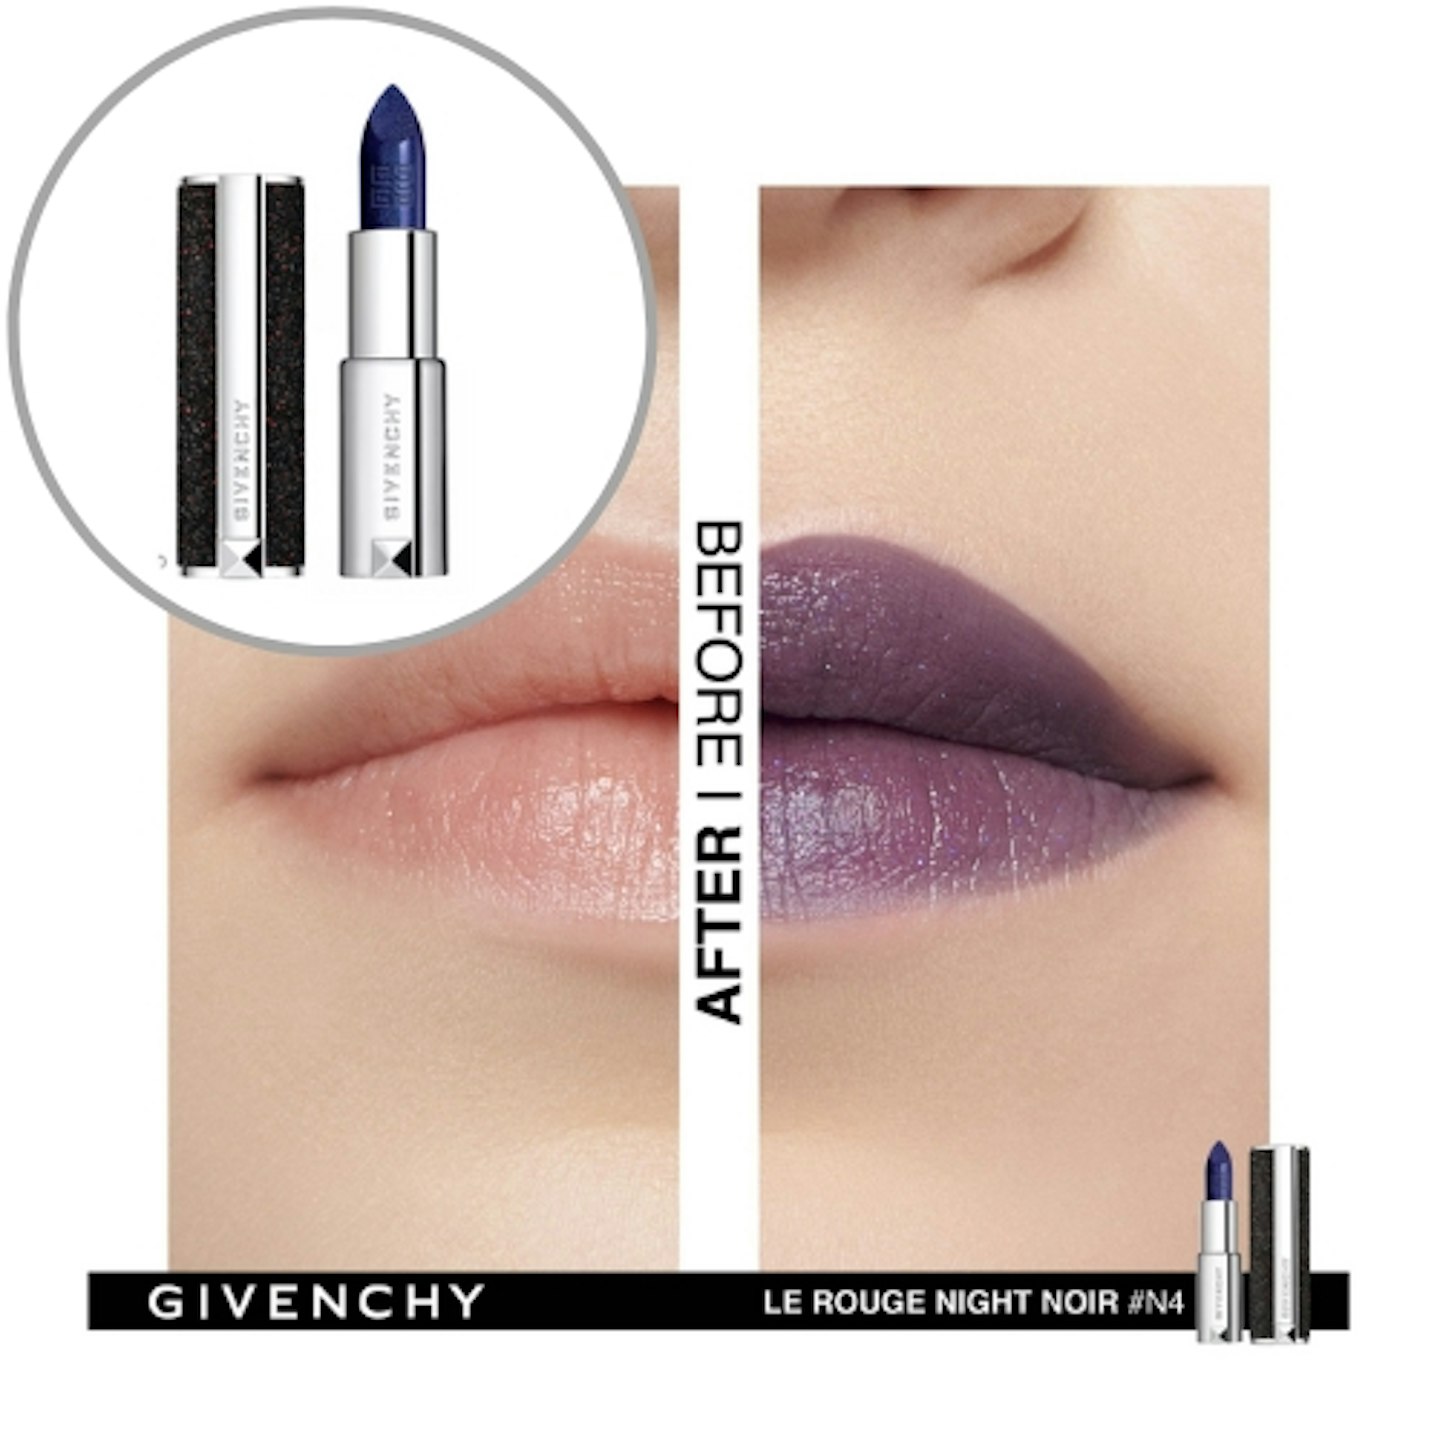 Givenchy Le Rouge Night Noir Lipstick in Night Blue (N4)